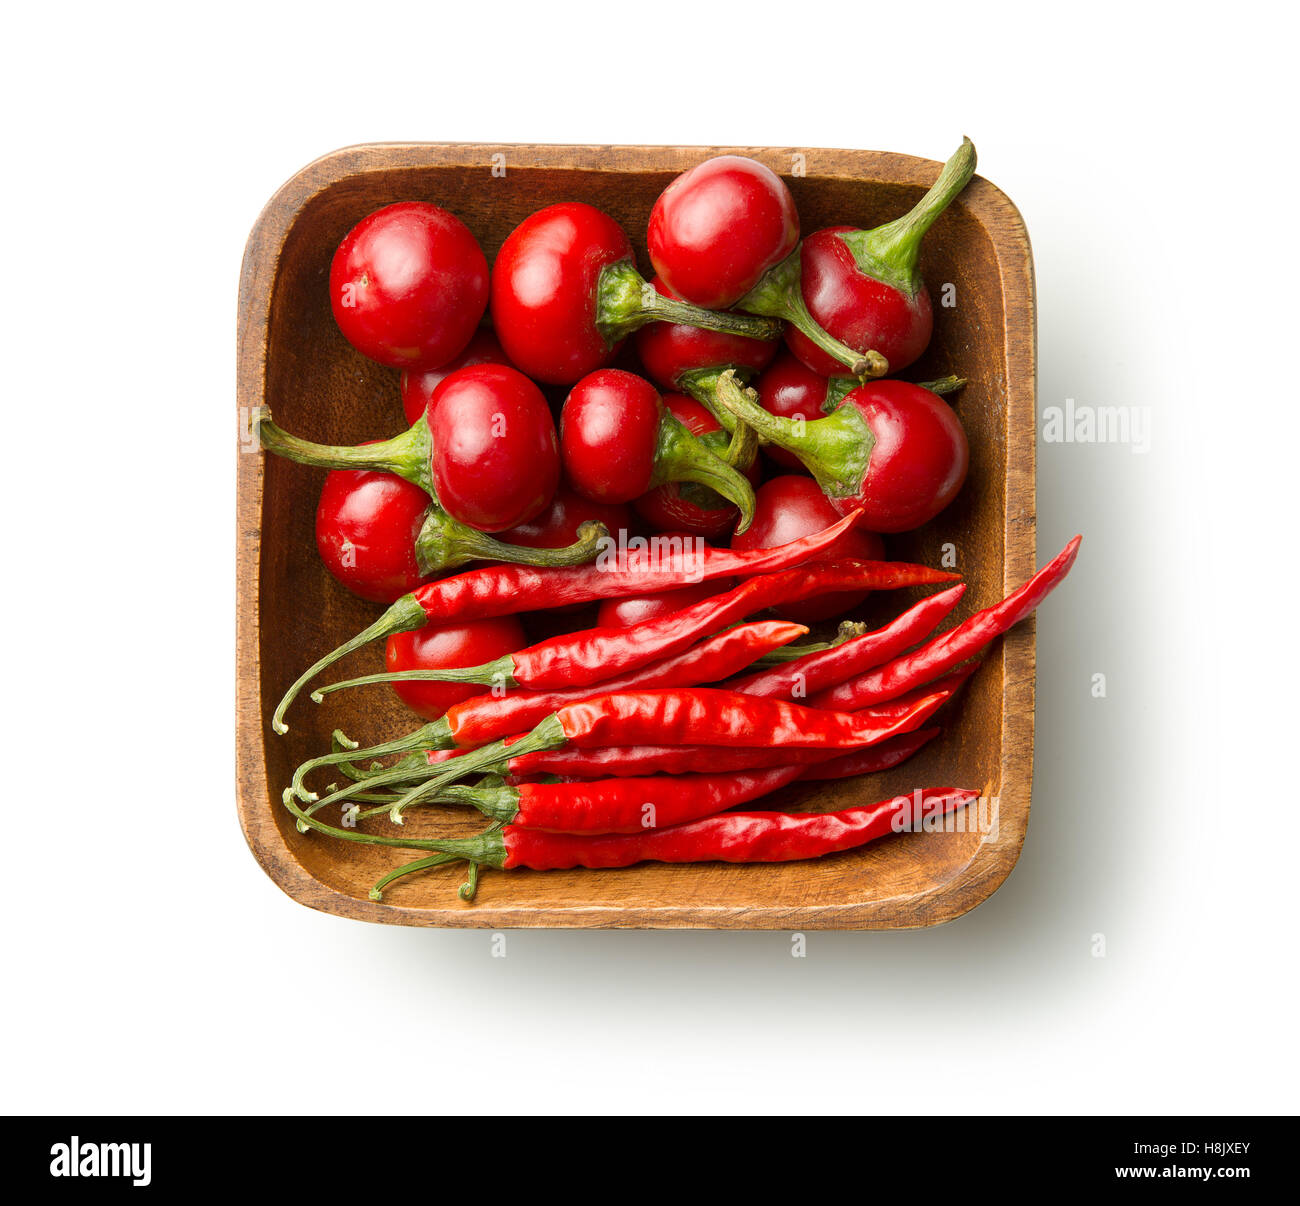 https://c8.alamy.com/comp/H8JXEY/round-red-chili-peppers-in-bowl-isolated-on-white-background-H8JXEY.jpg